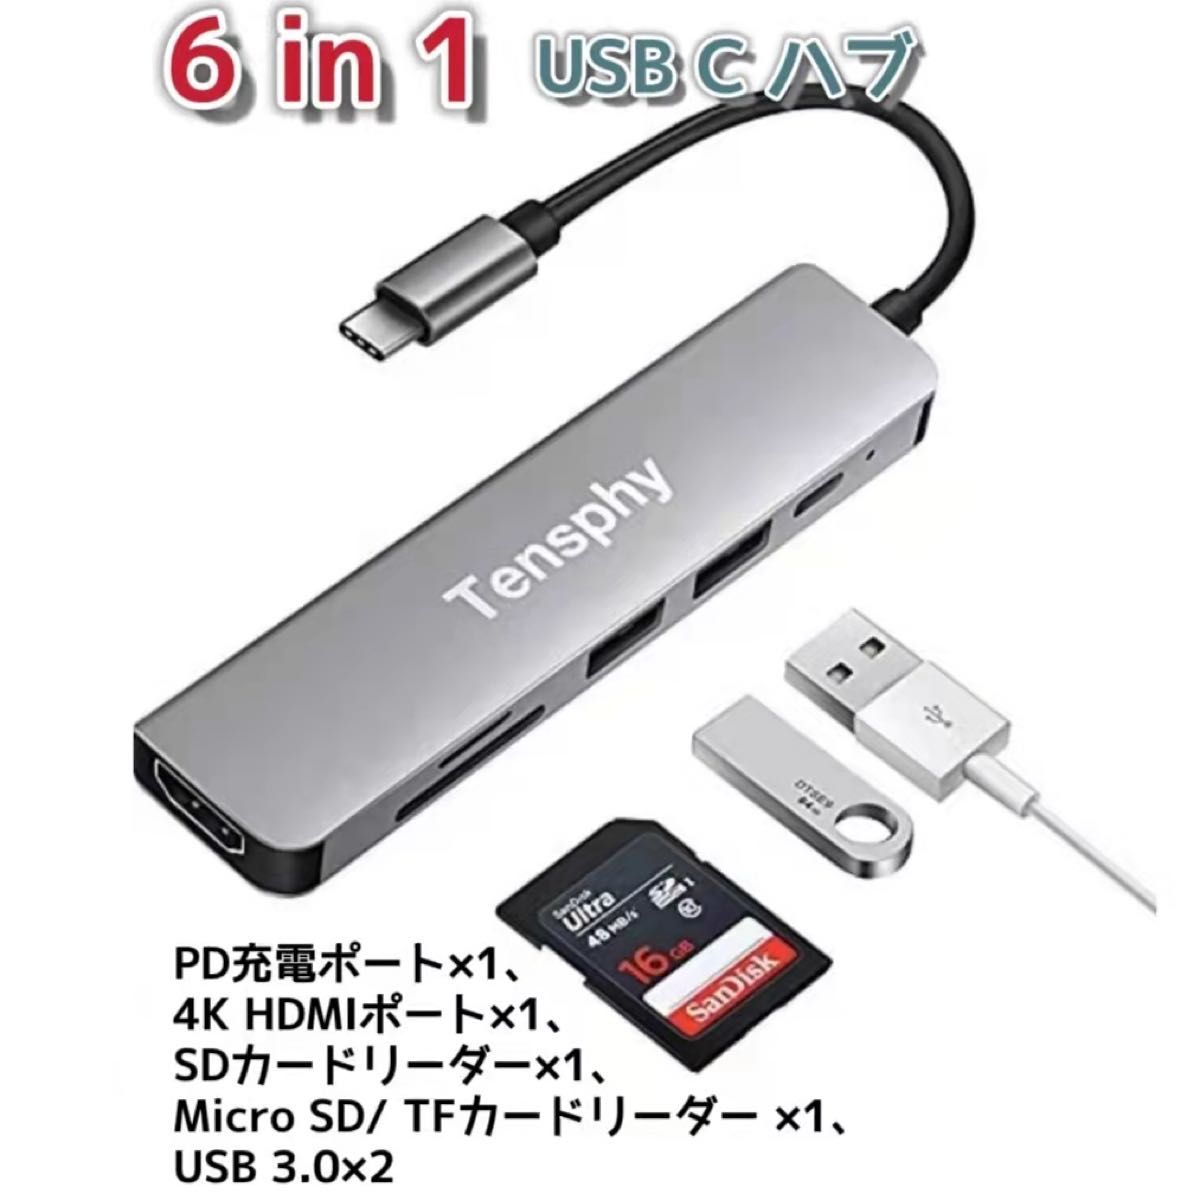 Tensphy ハブ 6-in-1 USB3.0 Type-C 5Gbps高速伝送 SD/TF カードリーダー HDMI 急速充電